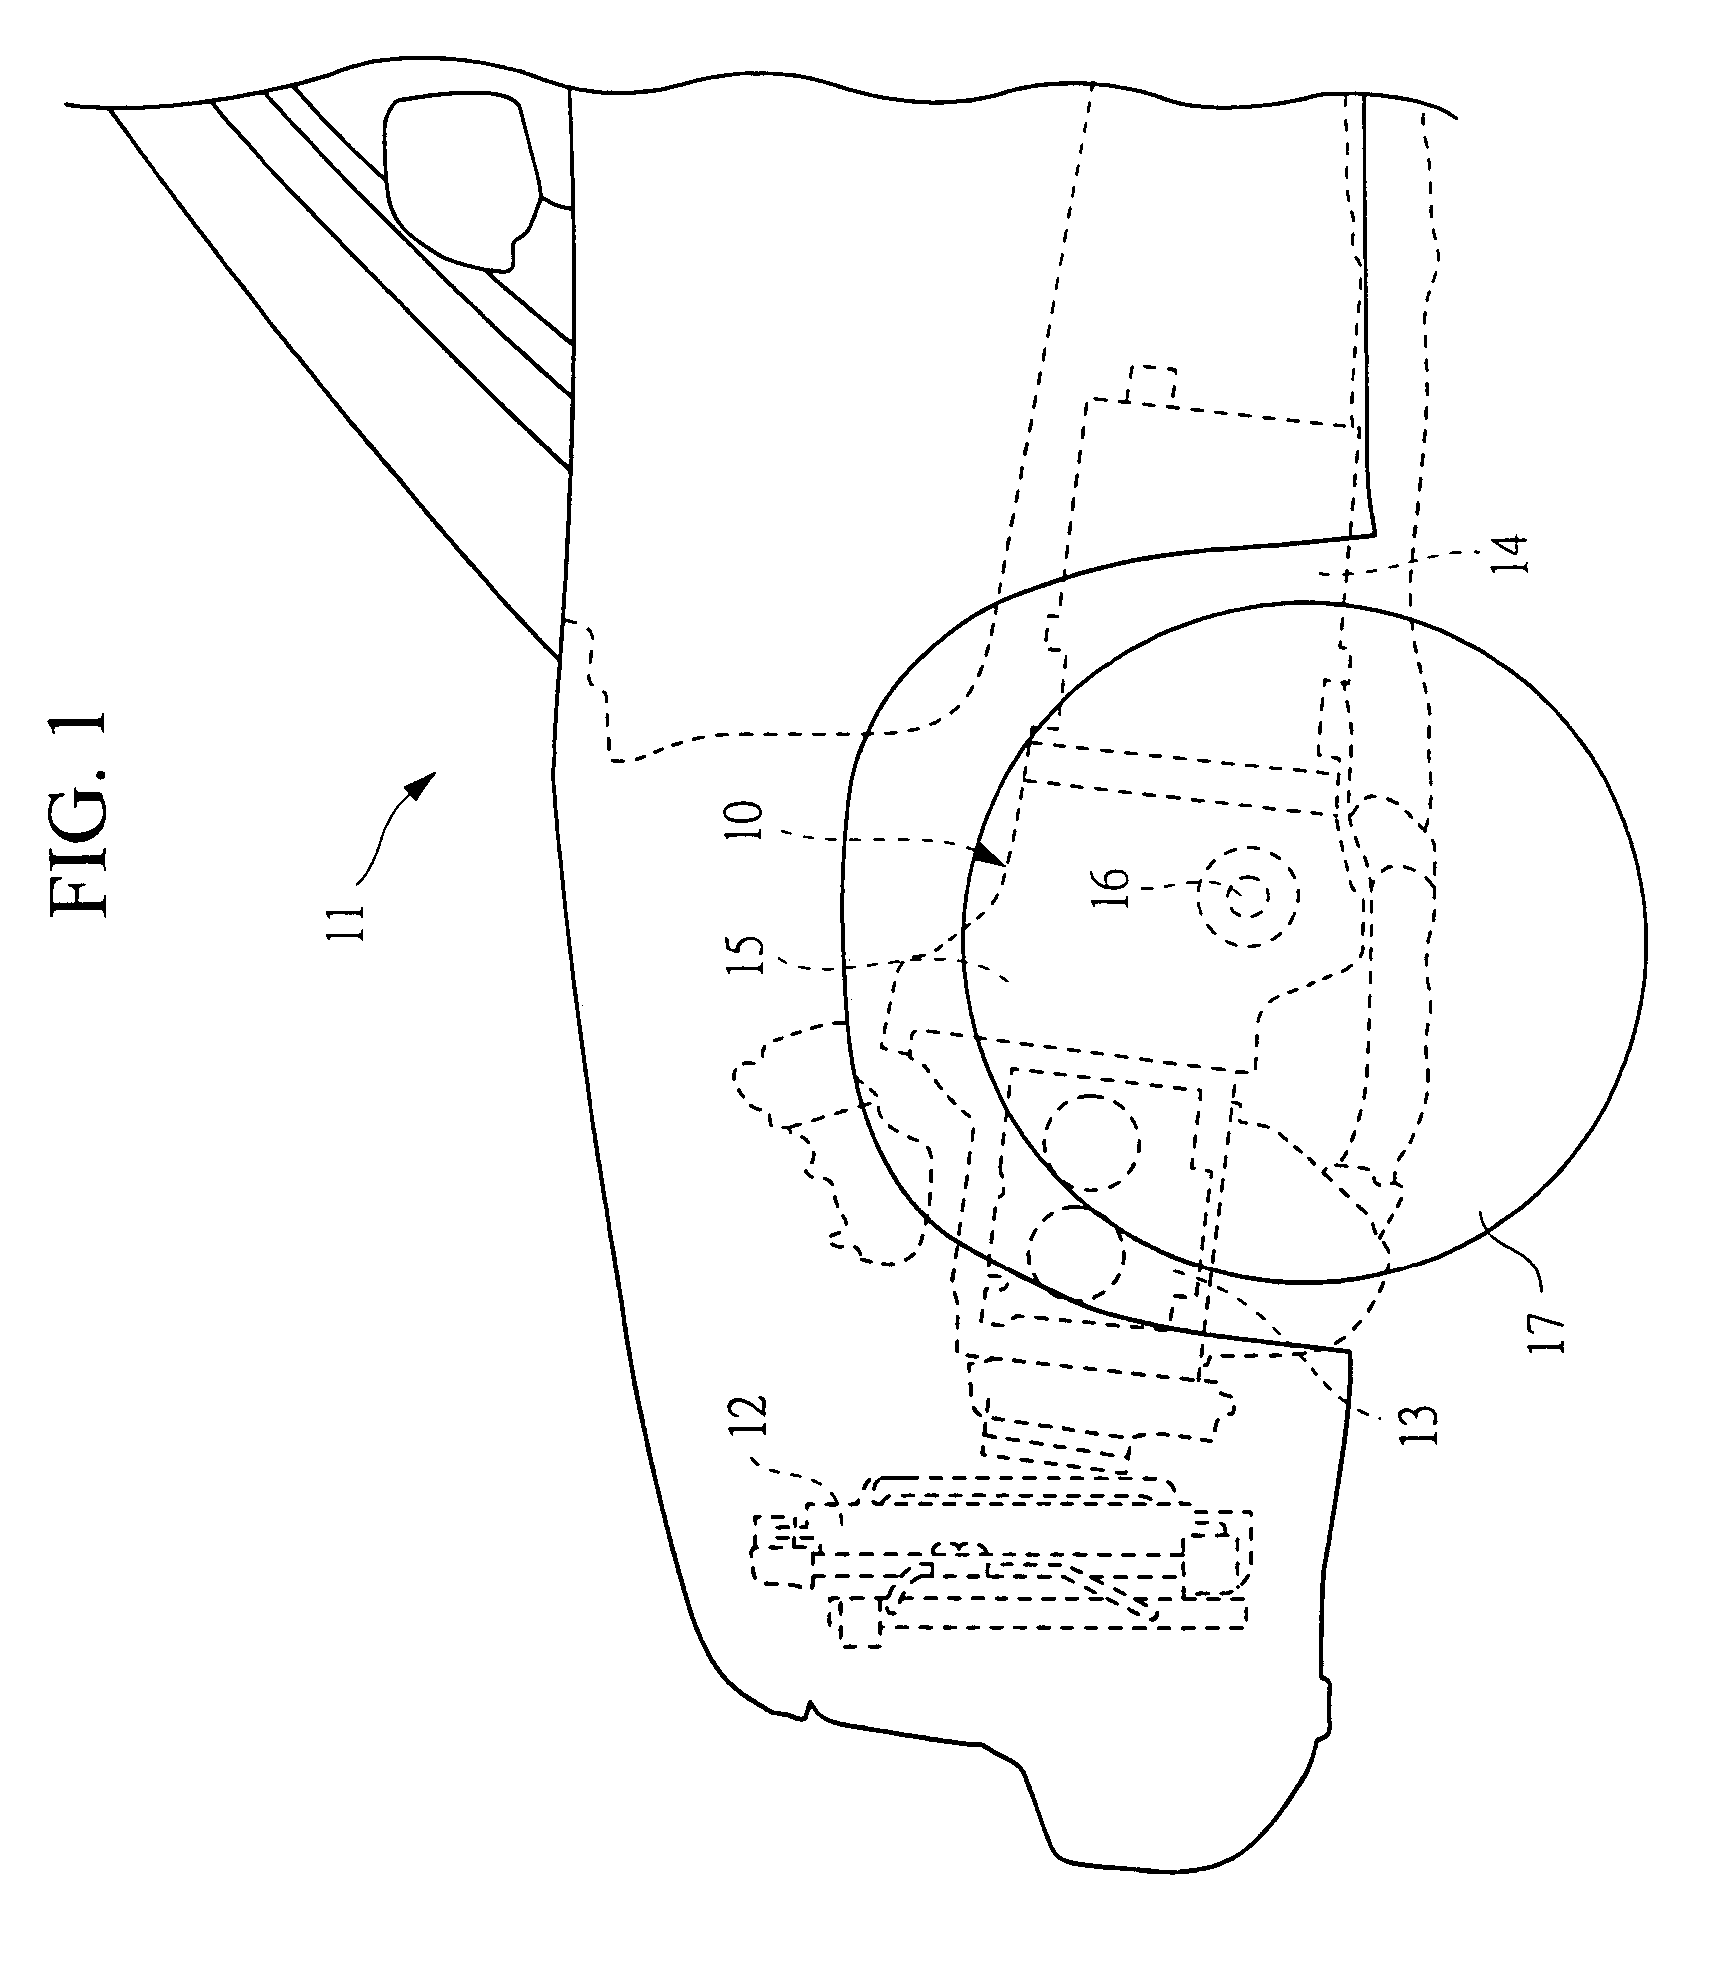 Driving apparatus for an electric vehicle